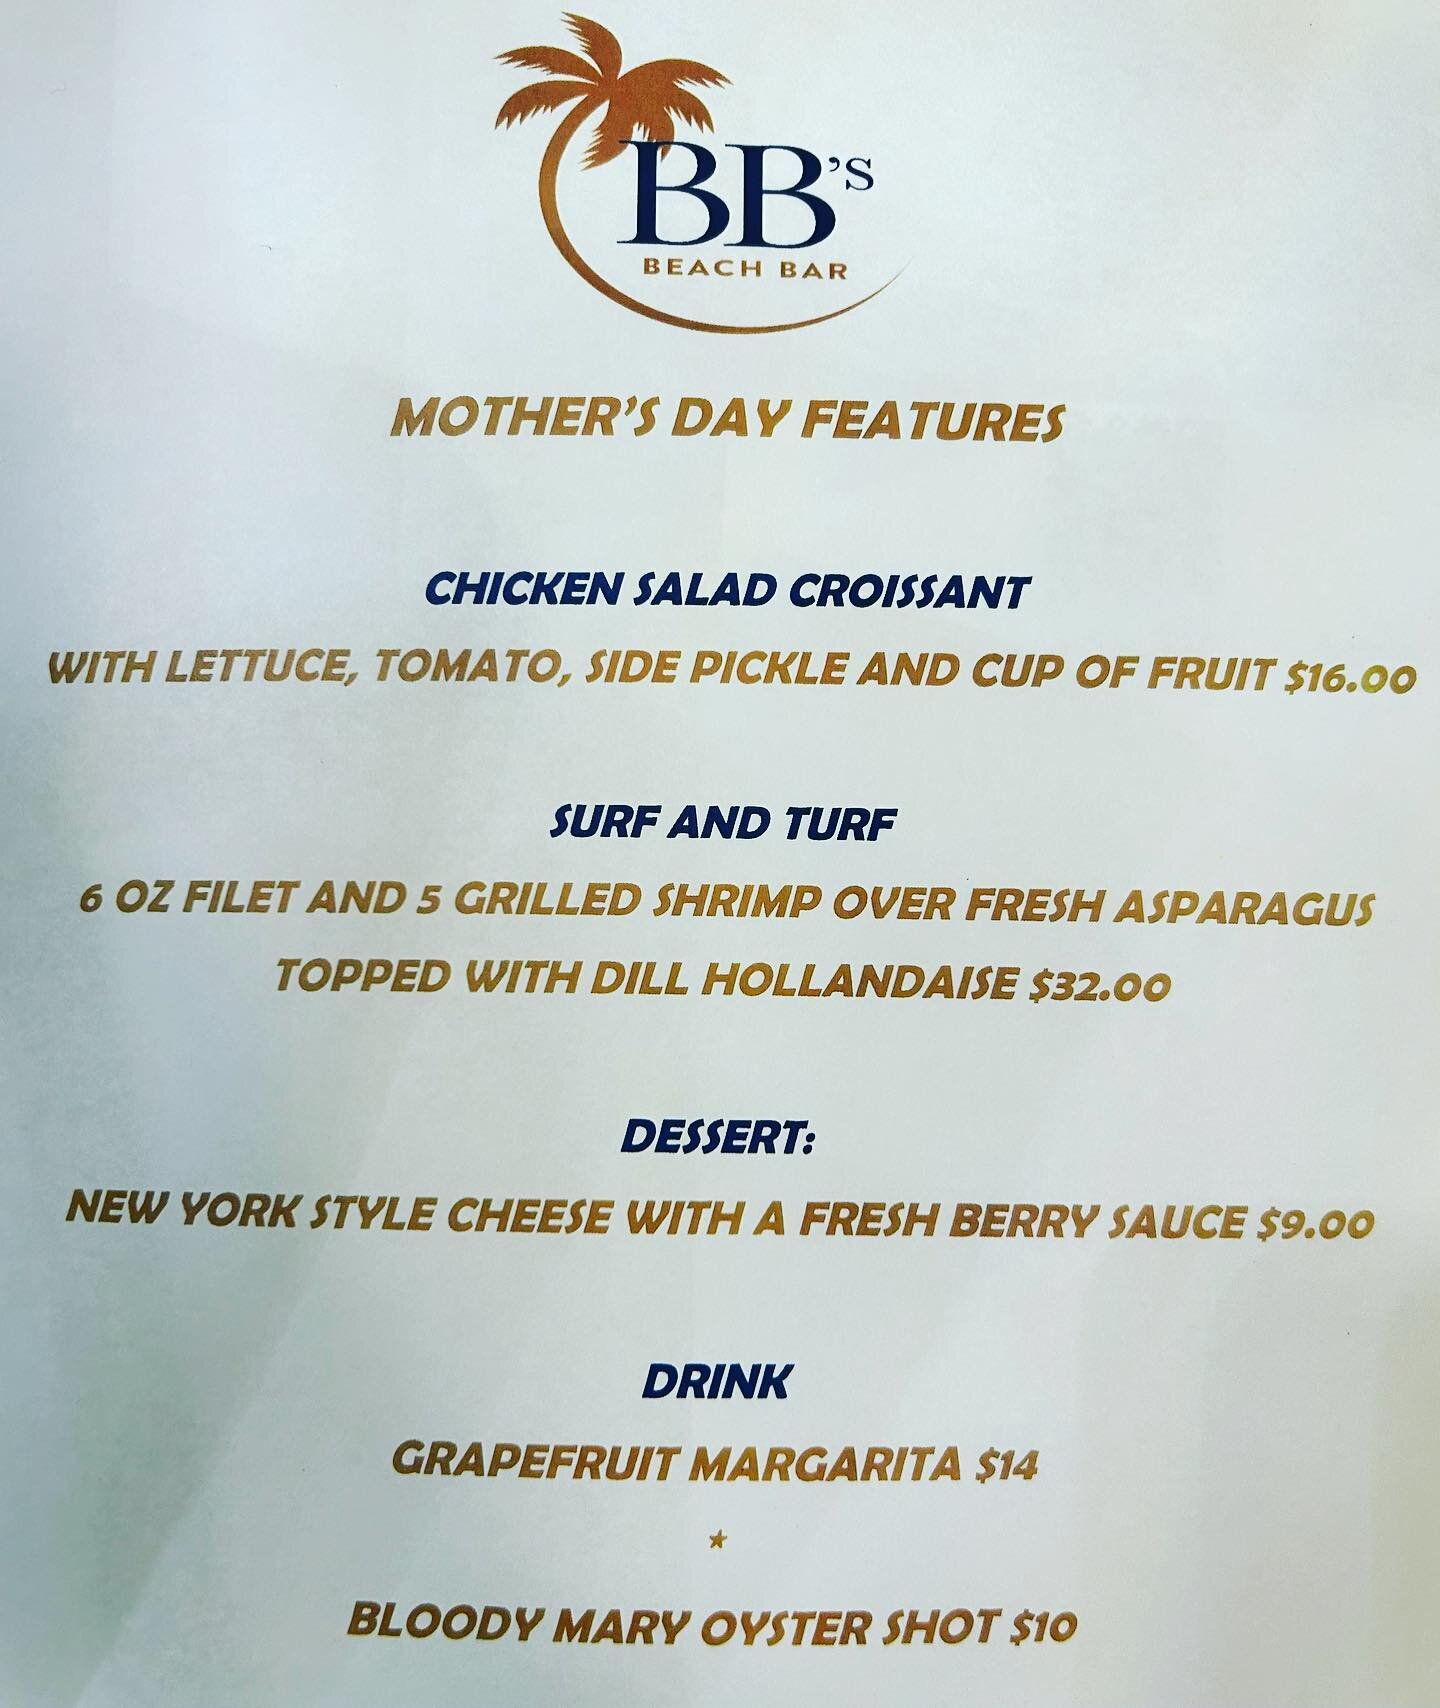 Getting ready for Mother&rsquo;s Day on the beach at BB&rsquo;s!
❤️🍽️🥂☀️🌴